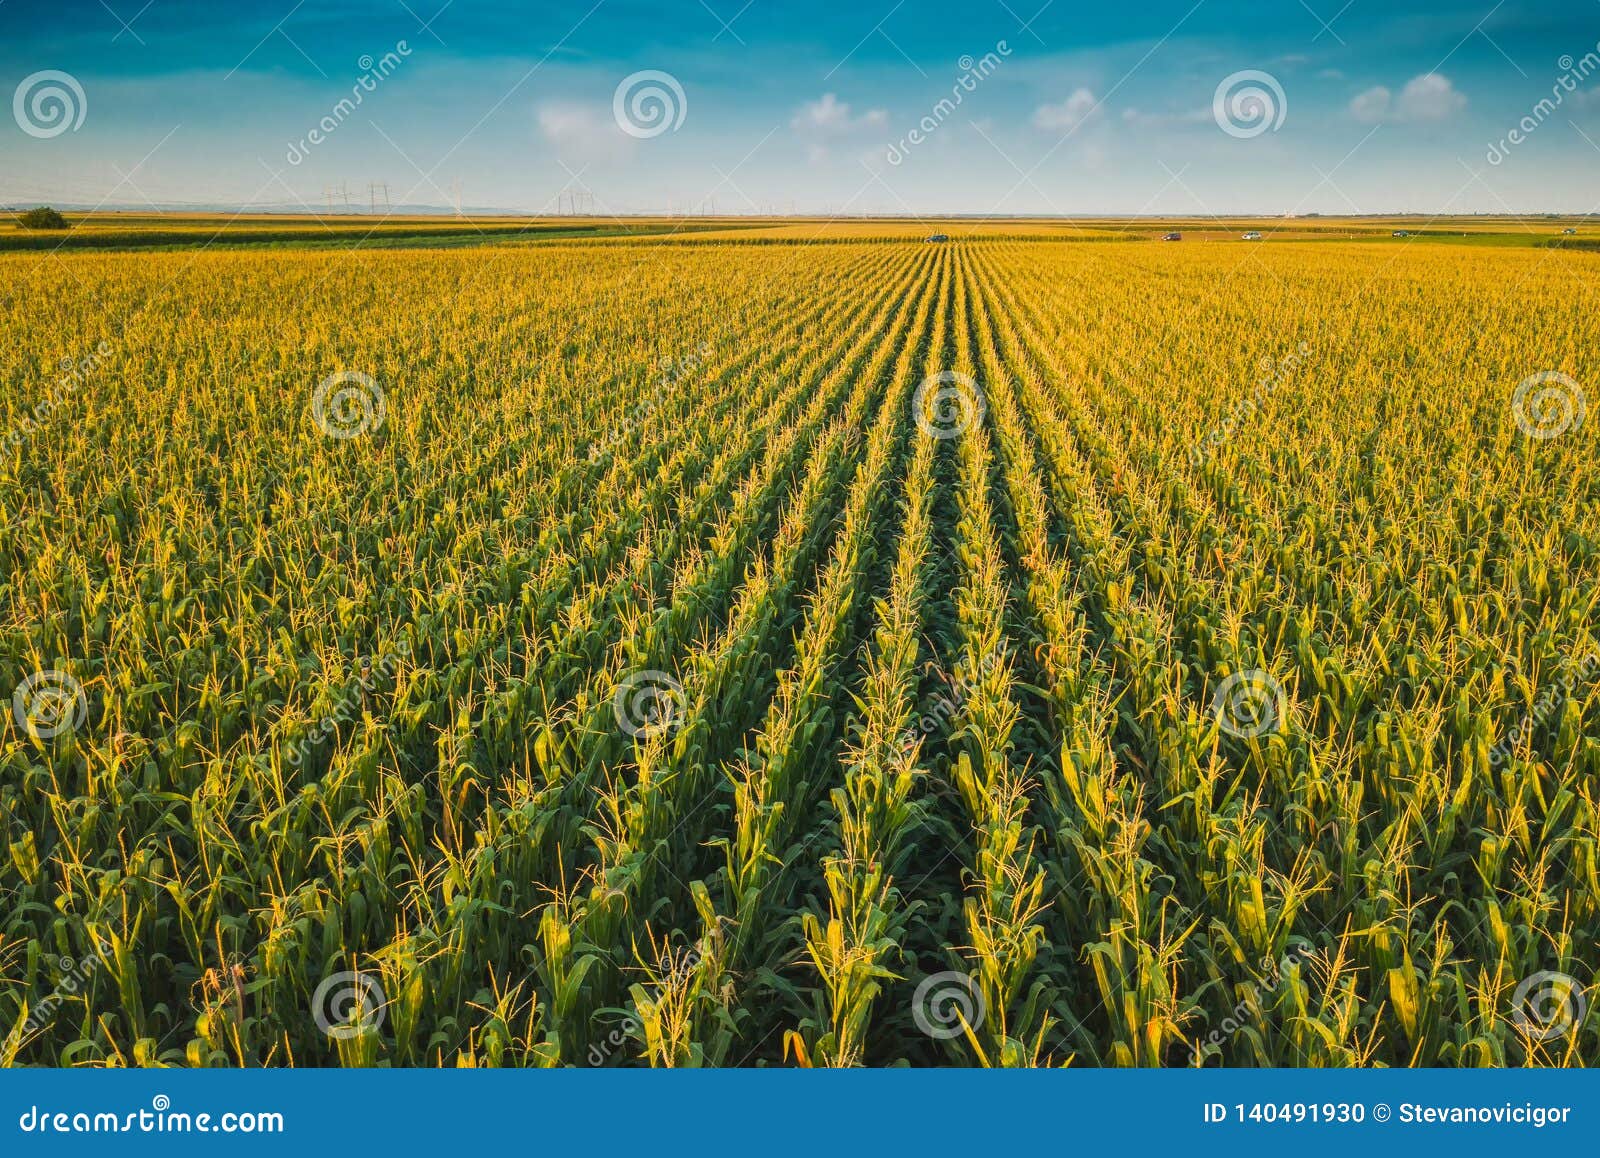 corn field from drone perspective